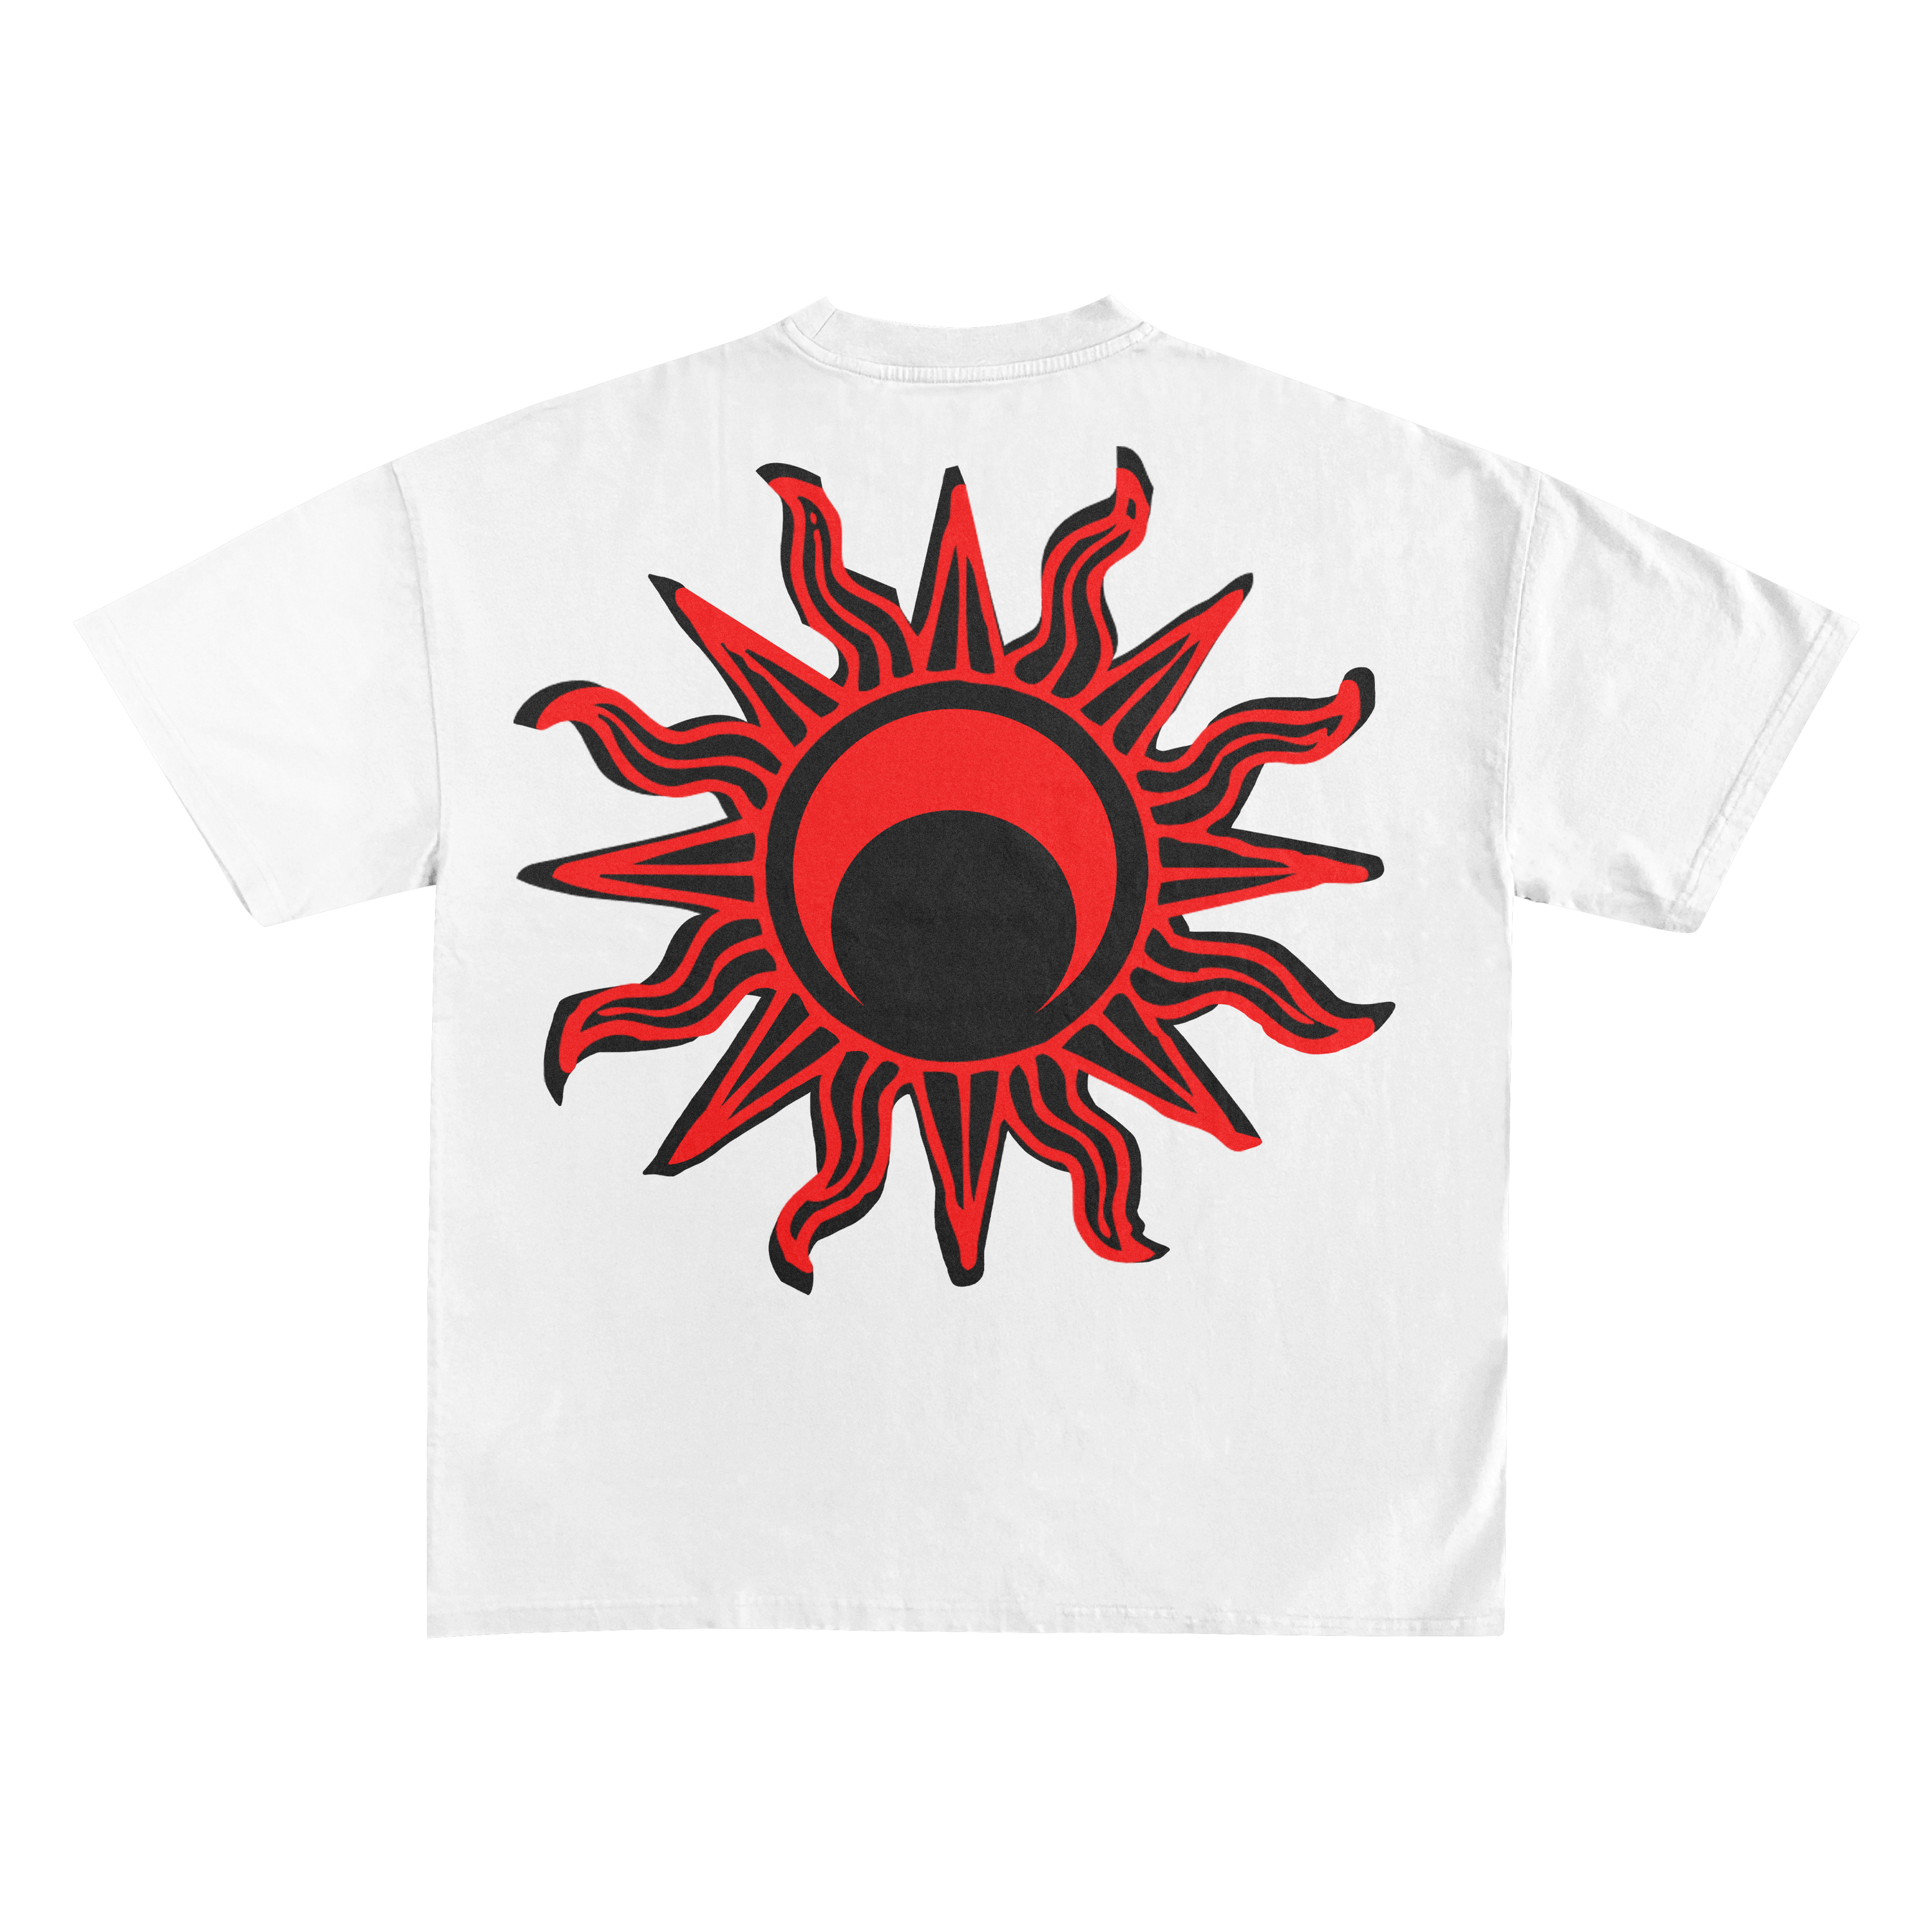 VISIONARY WHITE RED PUFF PRINT TEE